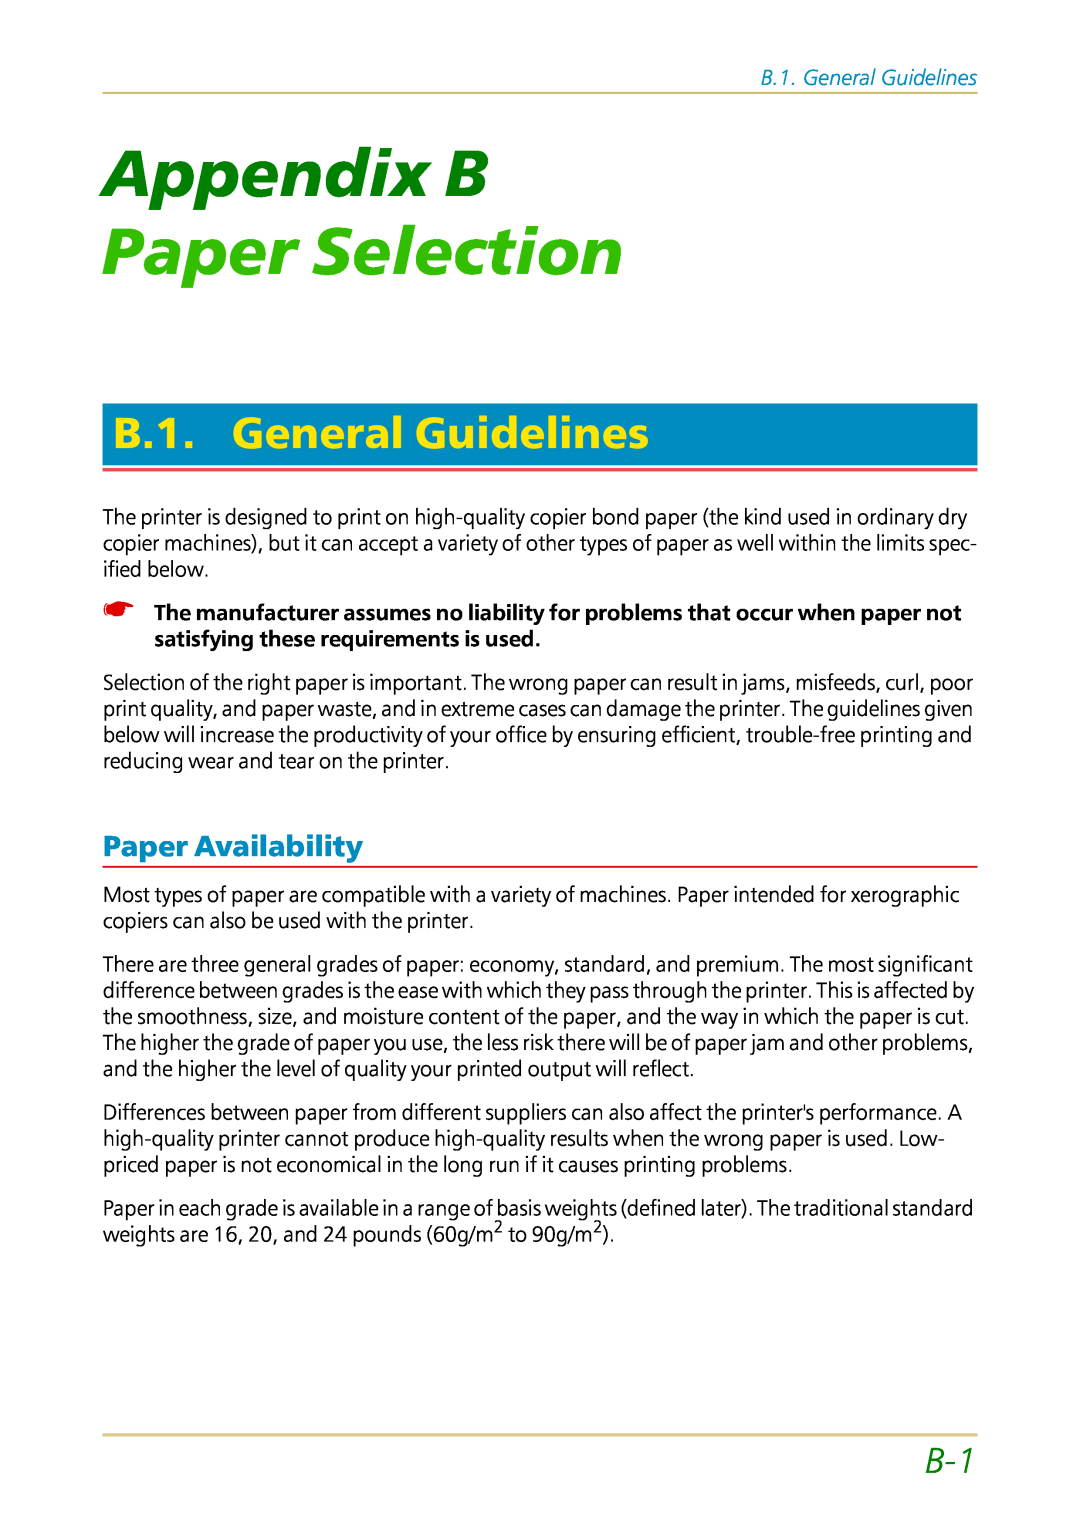 Kyocera FS-1700 user manual Appendix B, Paper Selection, B.1. General Guidelines, Paper Availability 